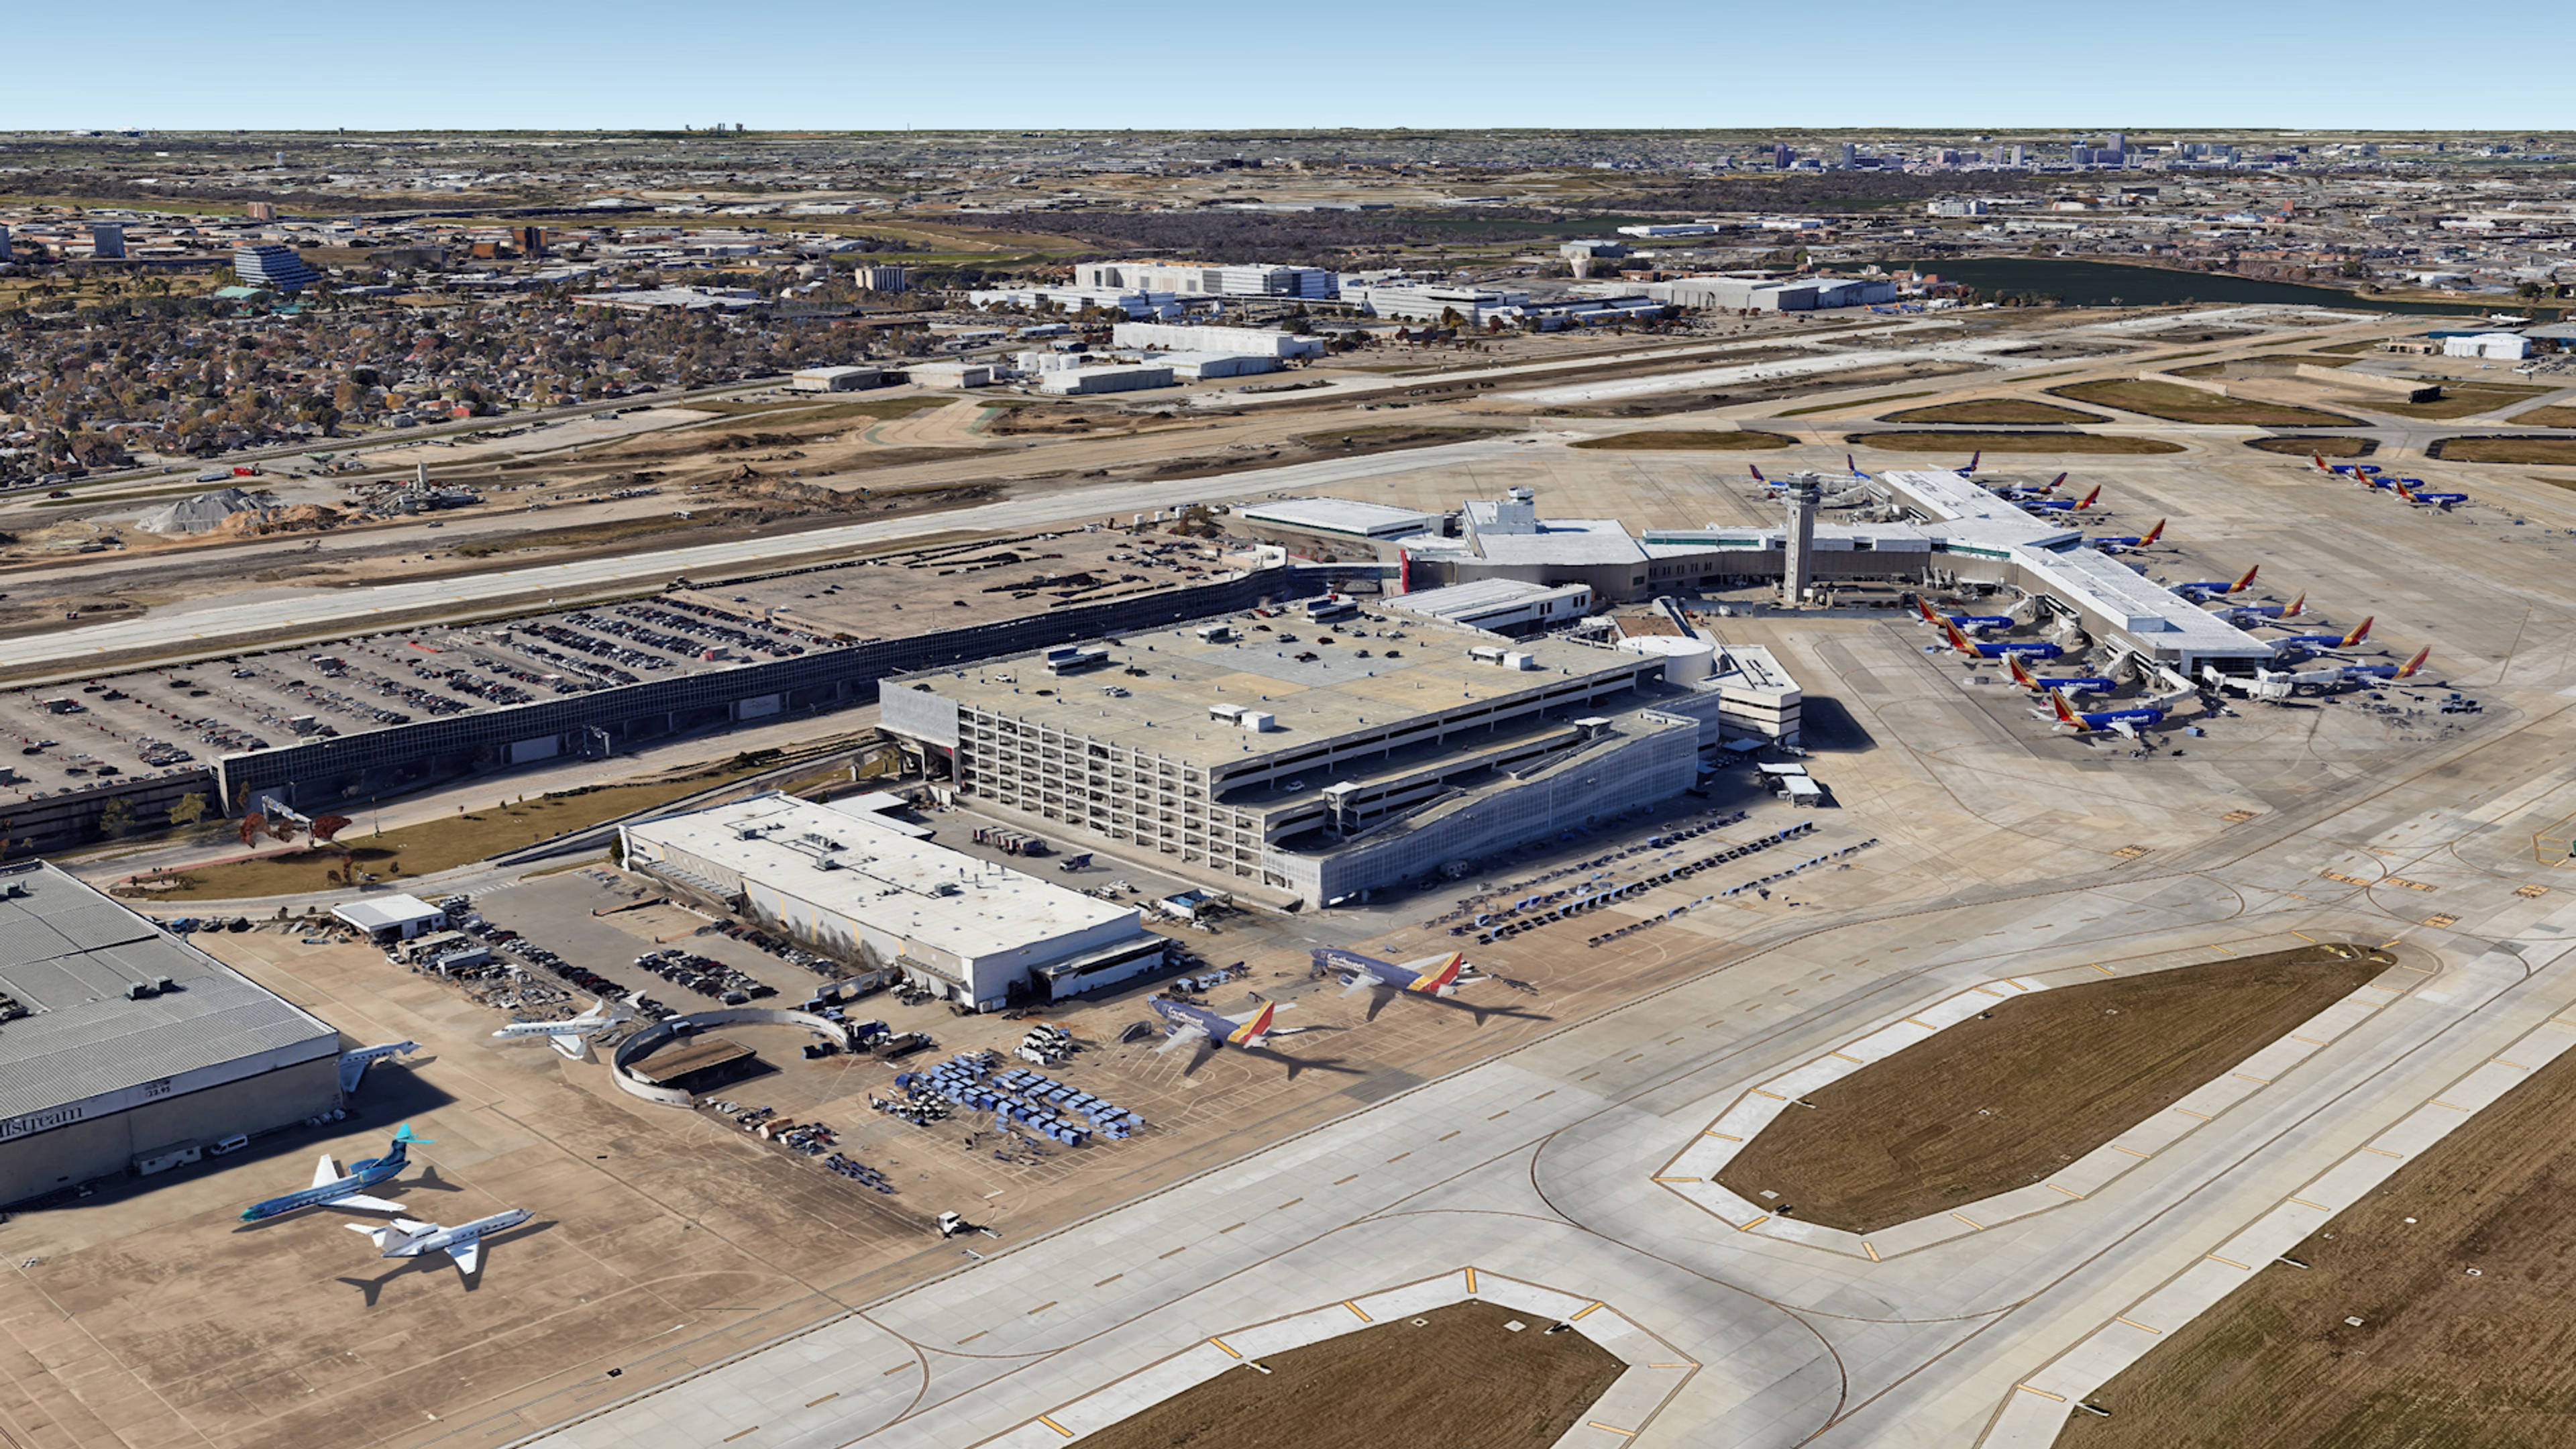  Aerial View of Dallas Love Airport Parking